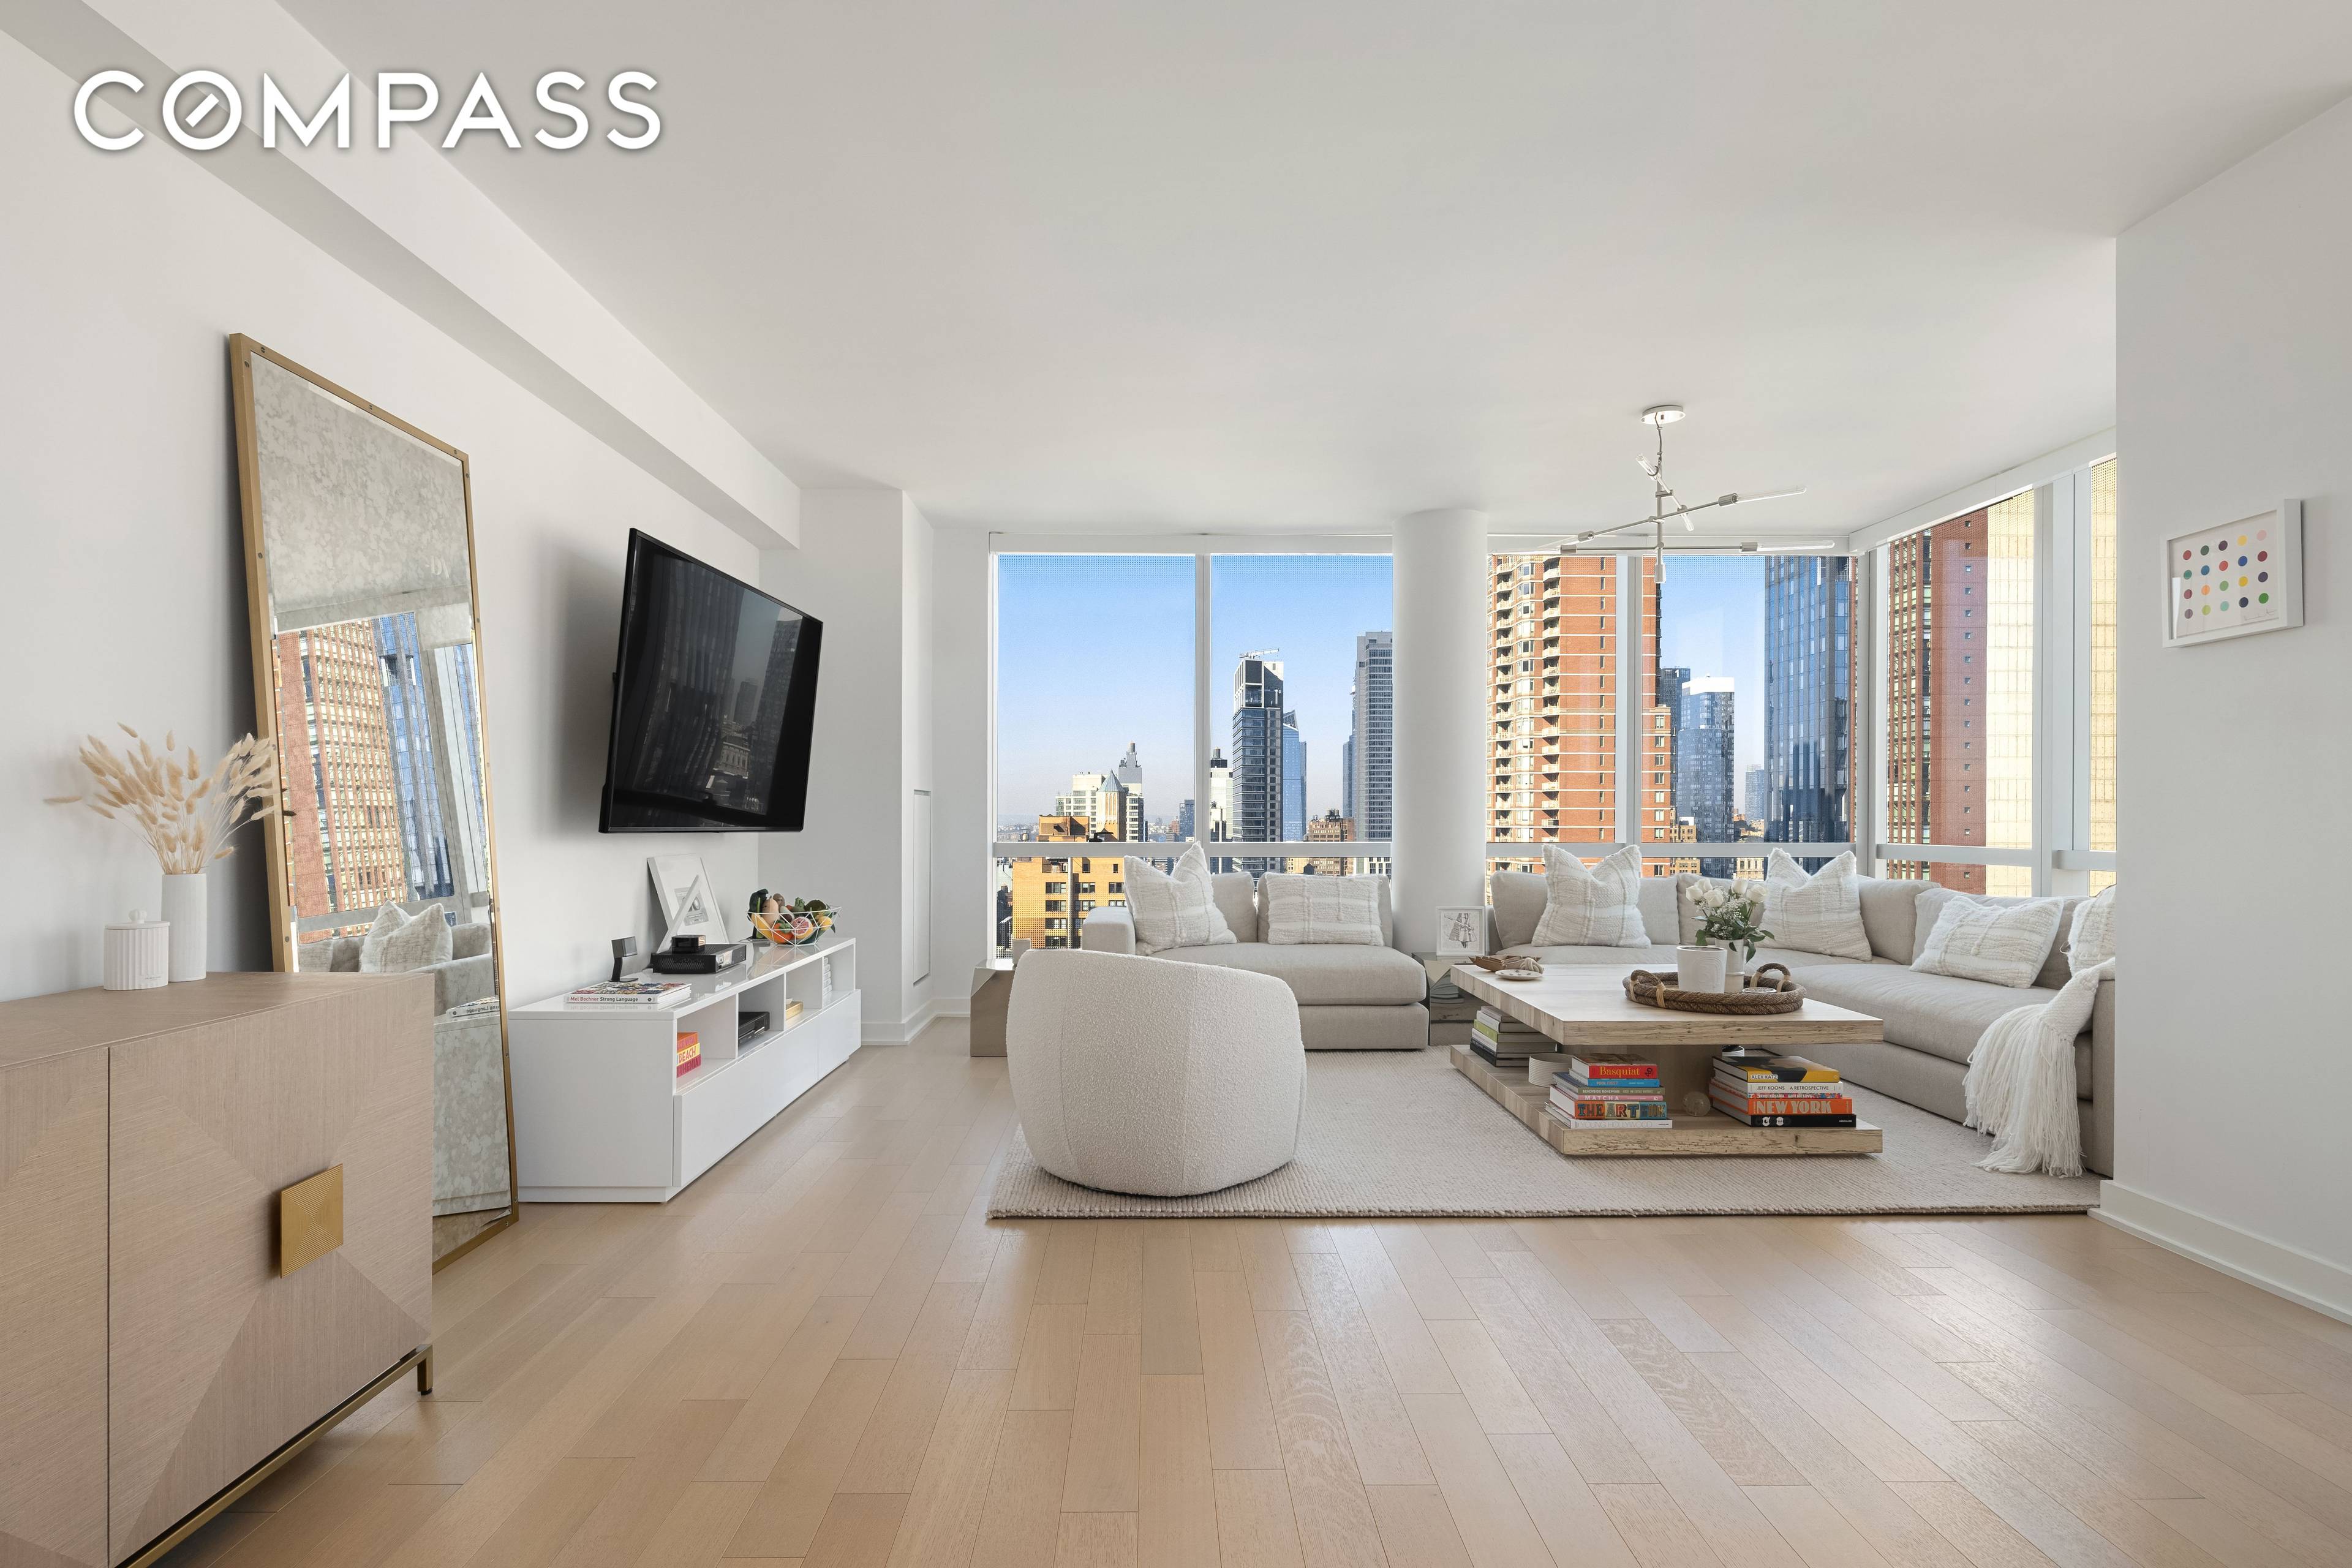 Prime Nomad. 2 BD 2. 5 BA luxurious and dramatic unobstructed city views framed by floor to ceiling windows.